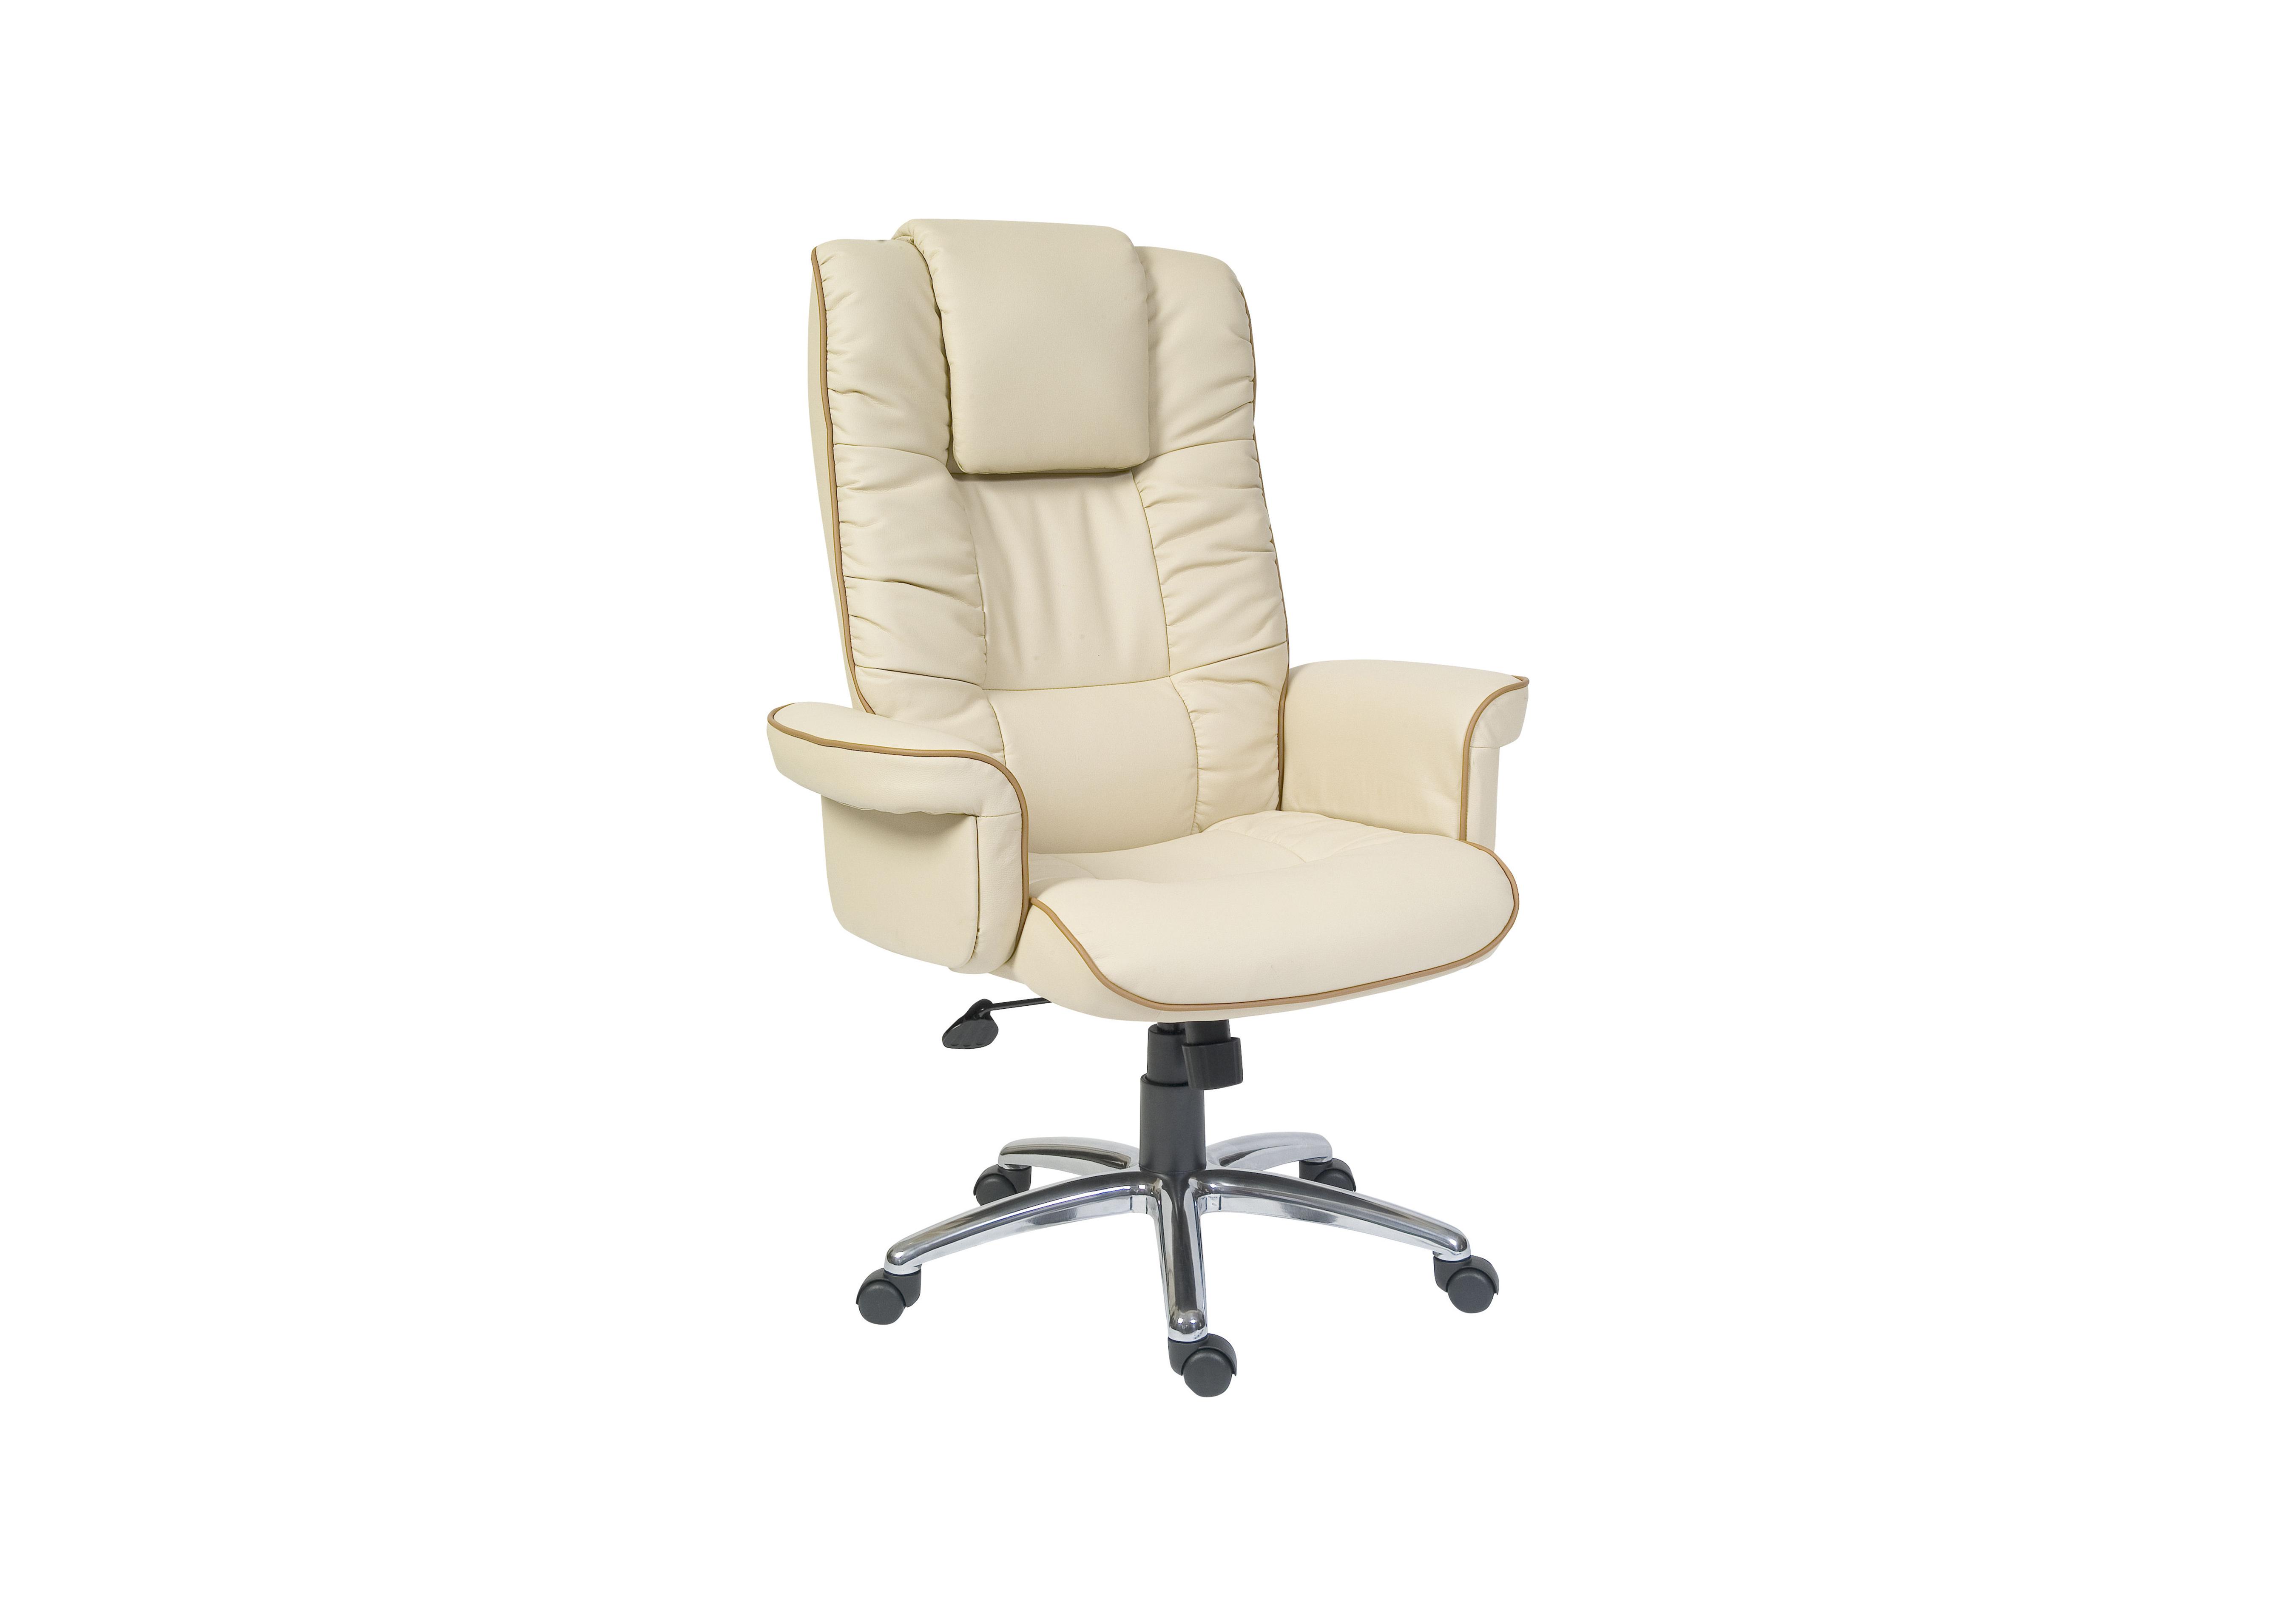 East River Pier 17 Office Chair in Cream on Furniture Village